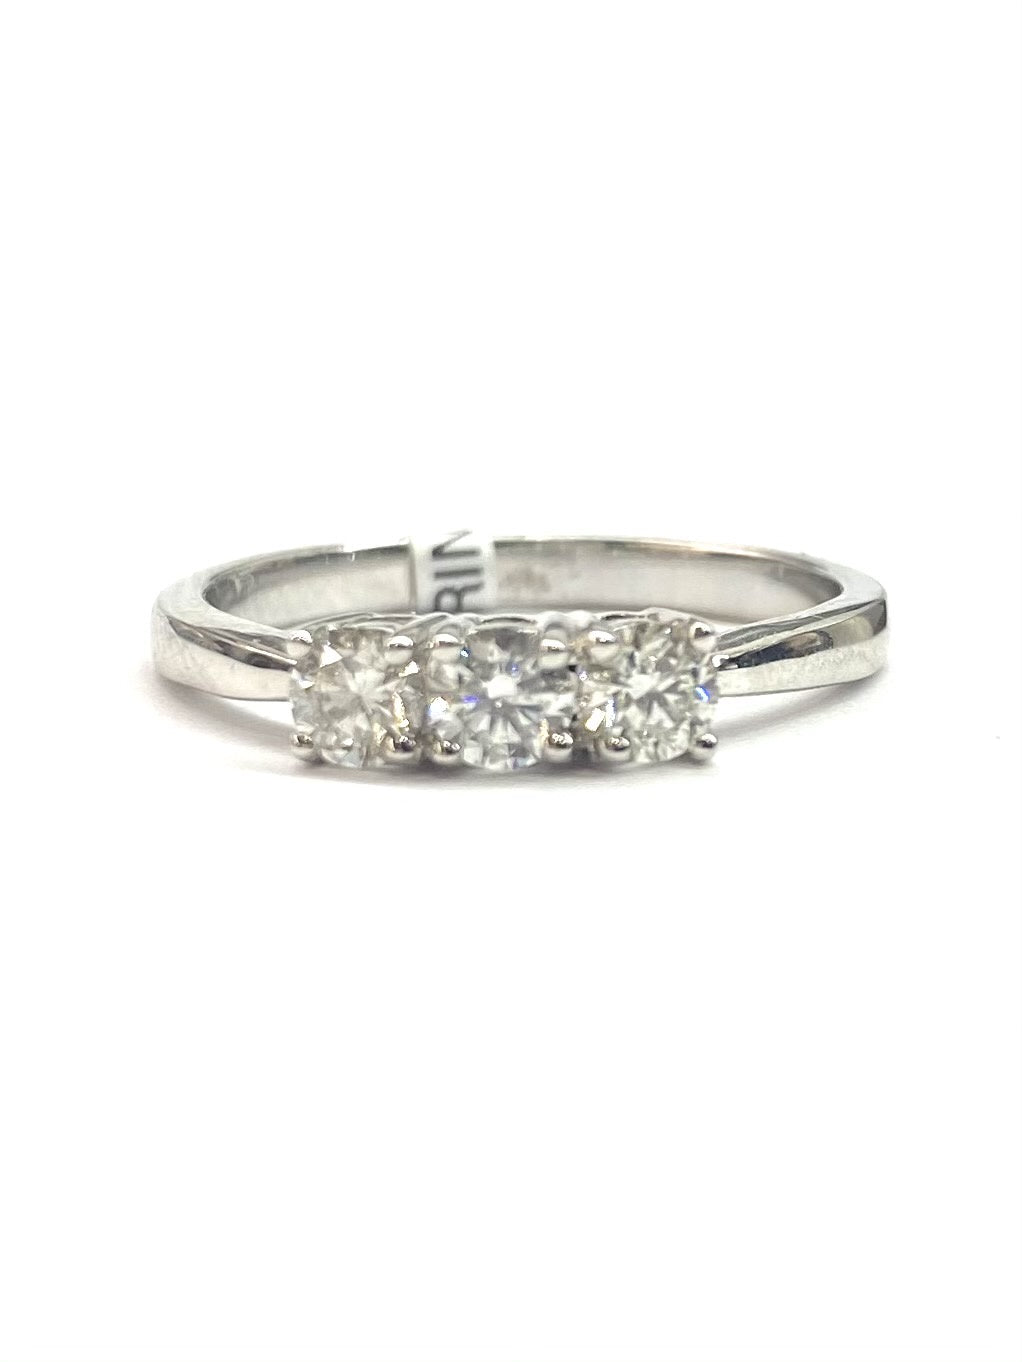 18ct White Gold 3 Sone Diamond Ring 0.52cts XR8206